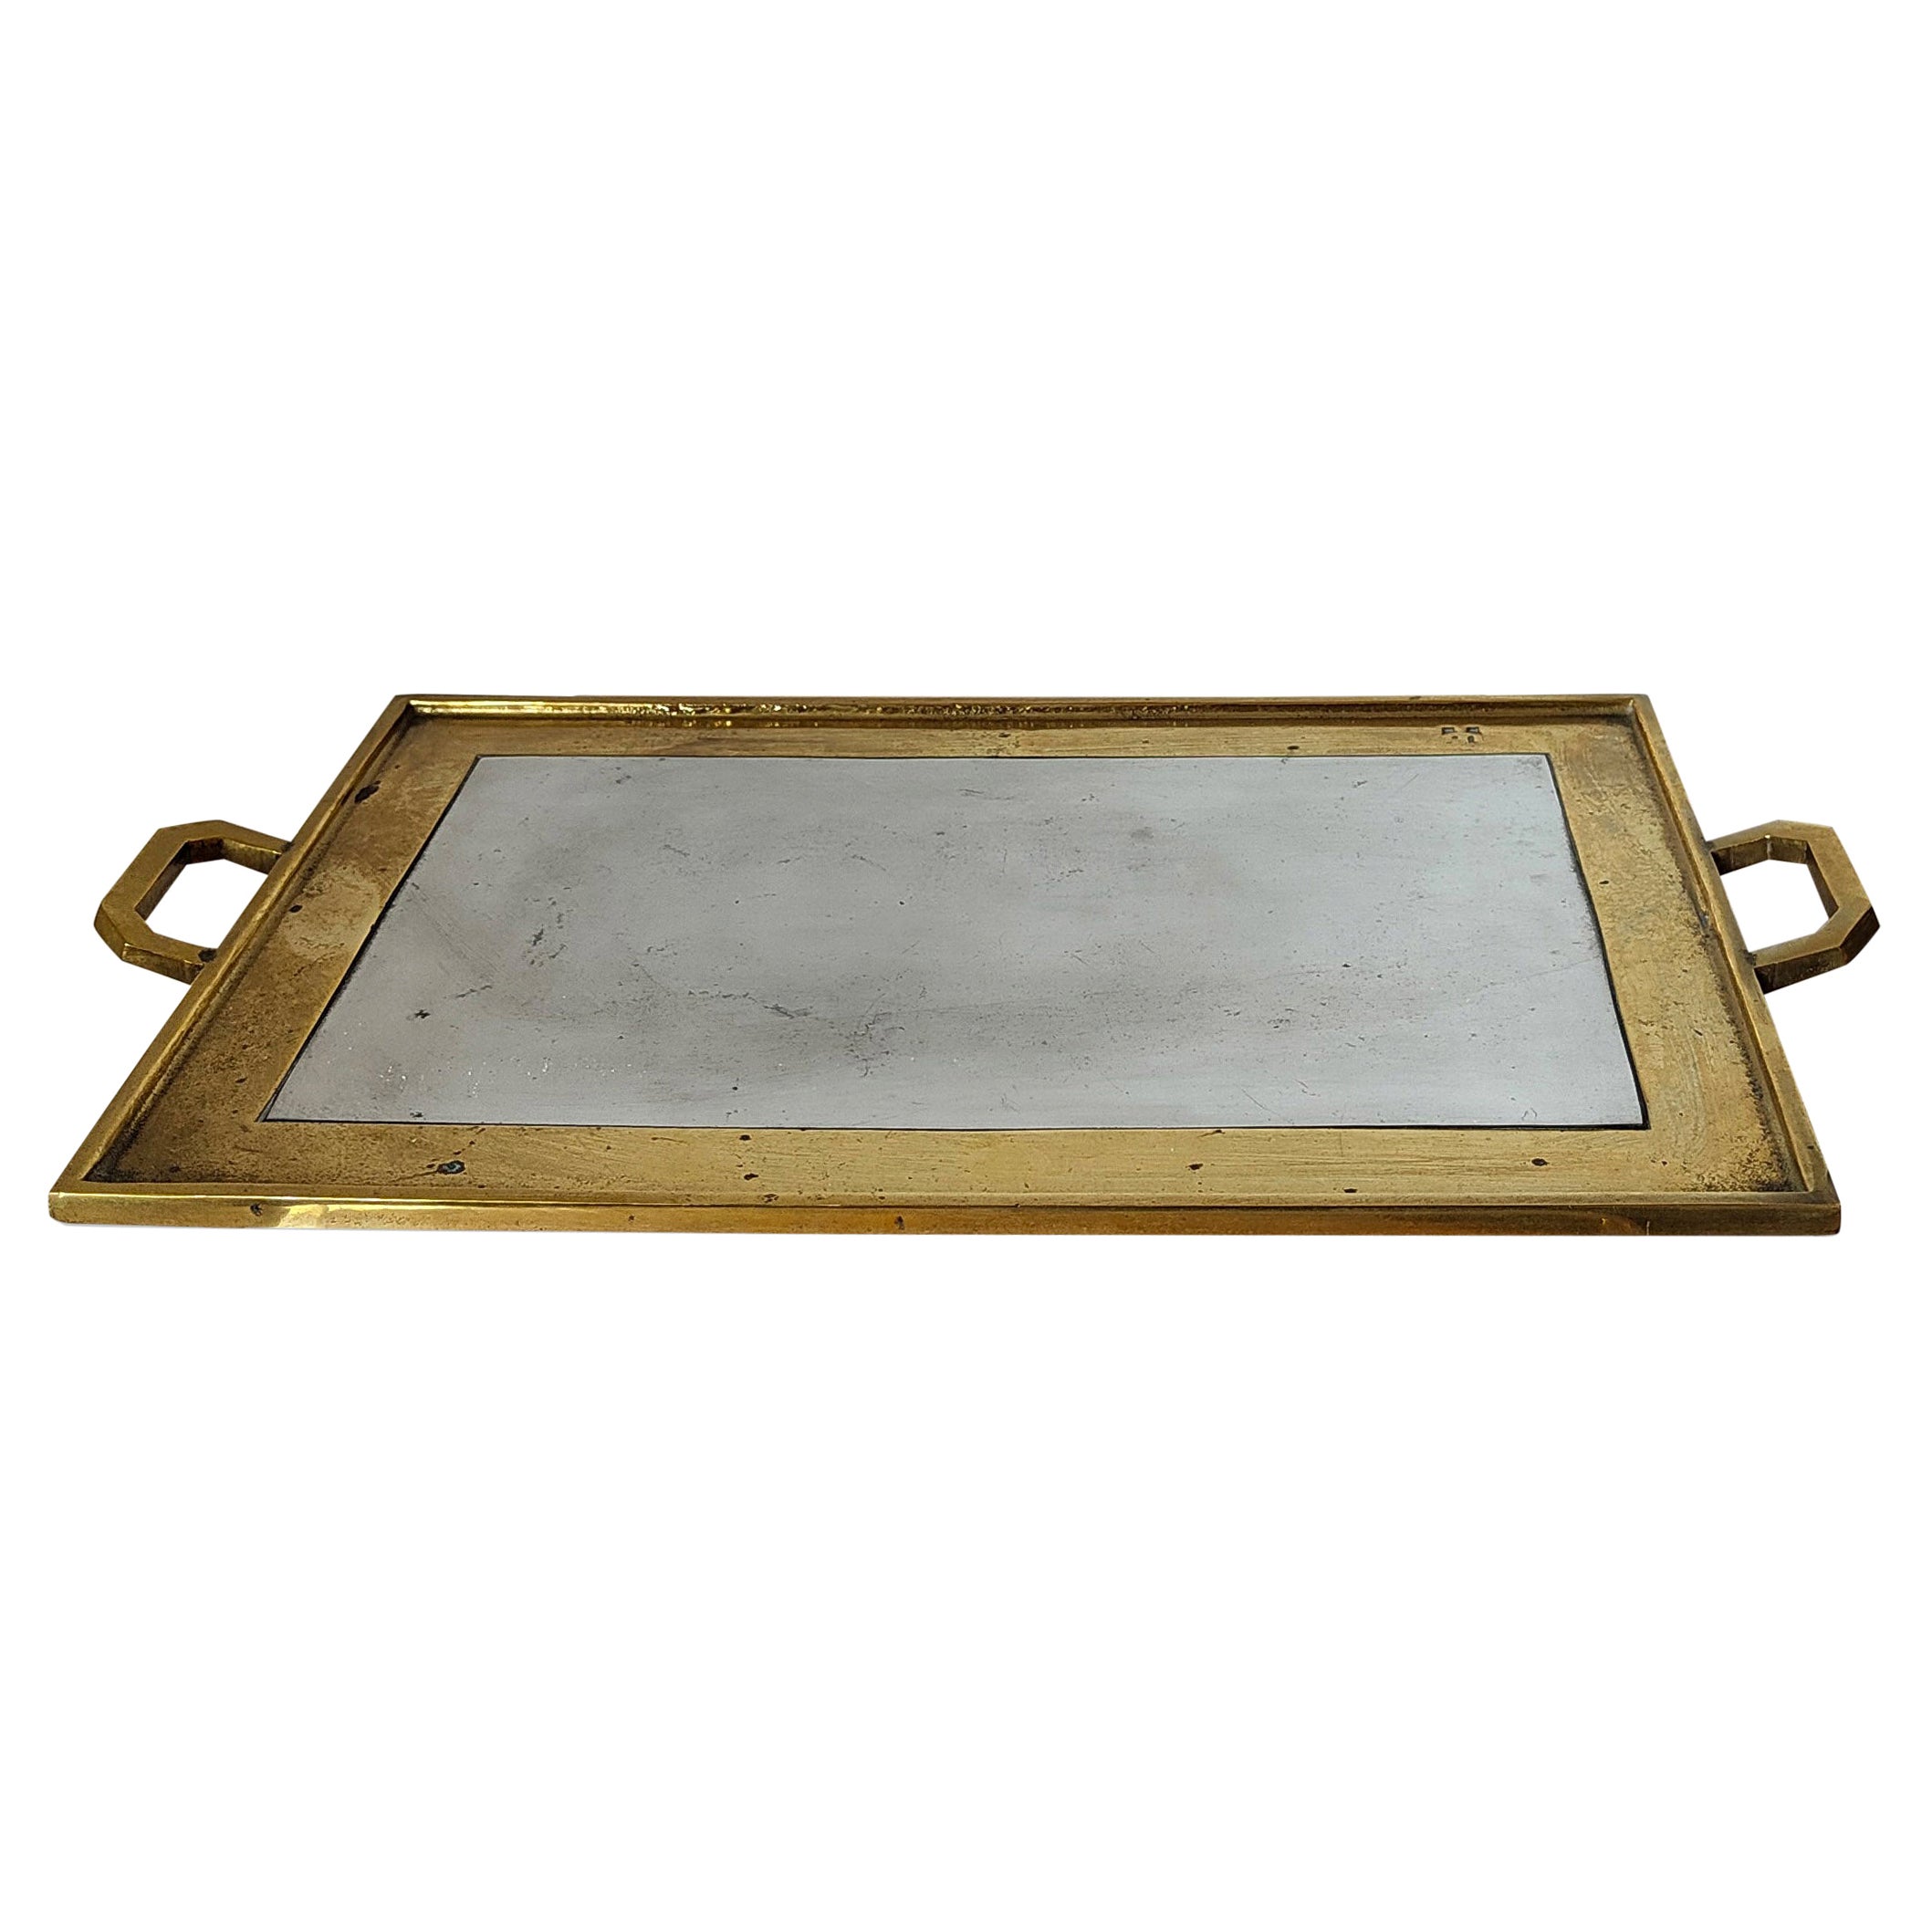 Bronze and Mixed Metals Serving Tray by David Marshall, Spain, Late 1970s